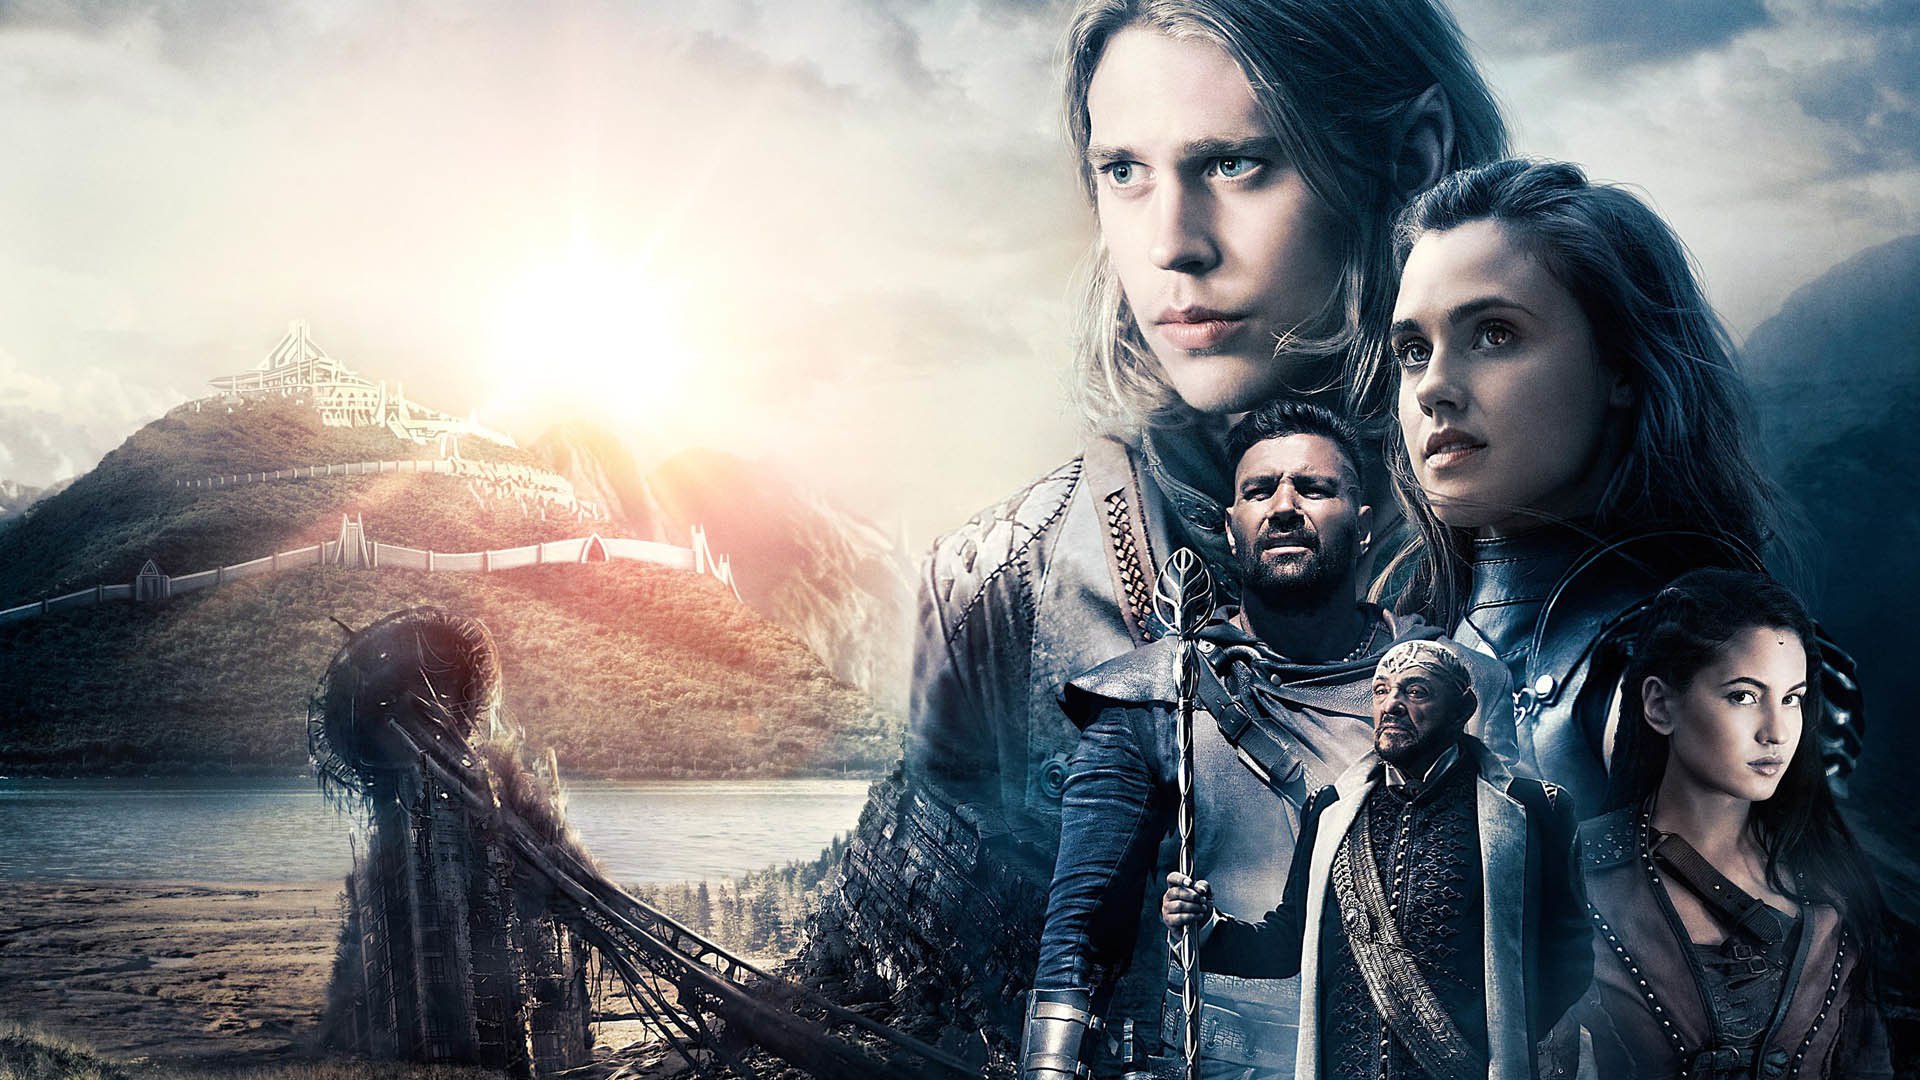 The Shannara Chronicles Picture